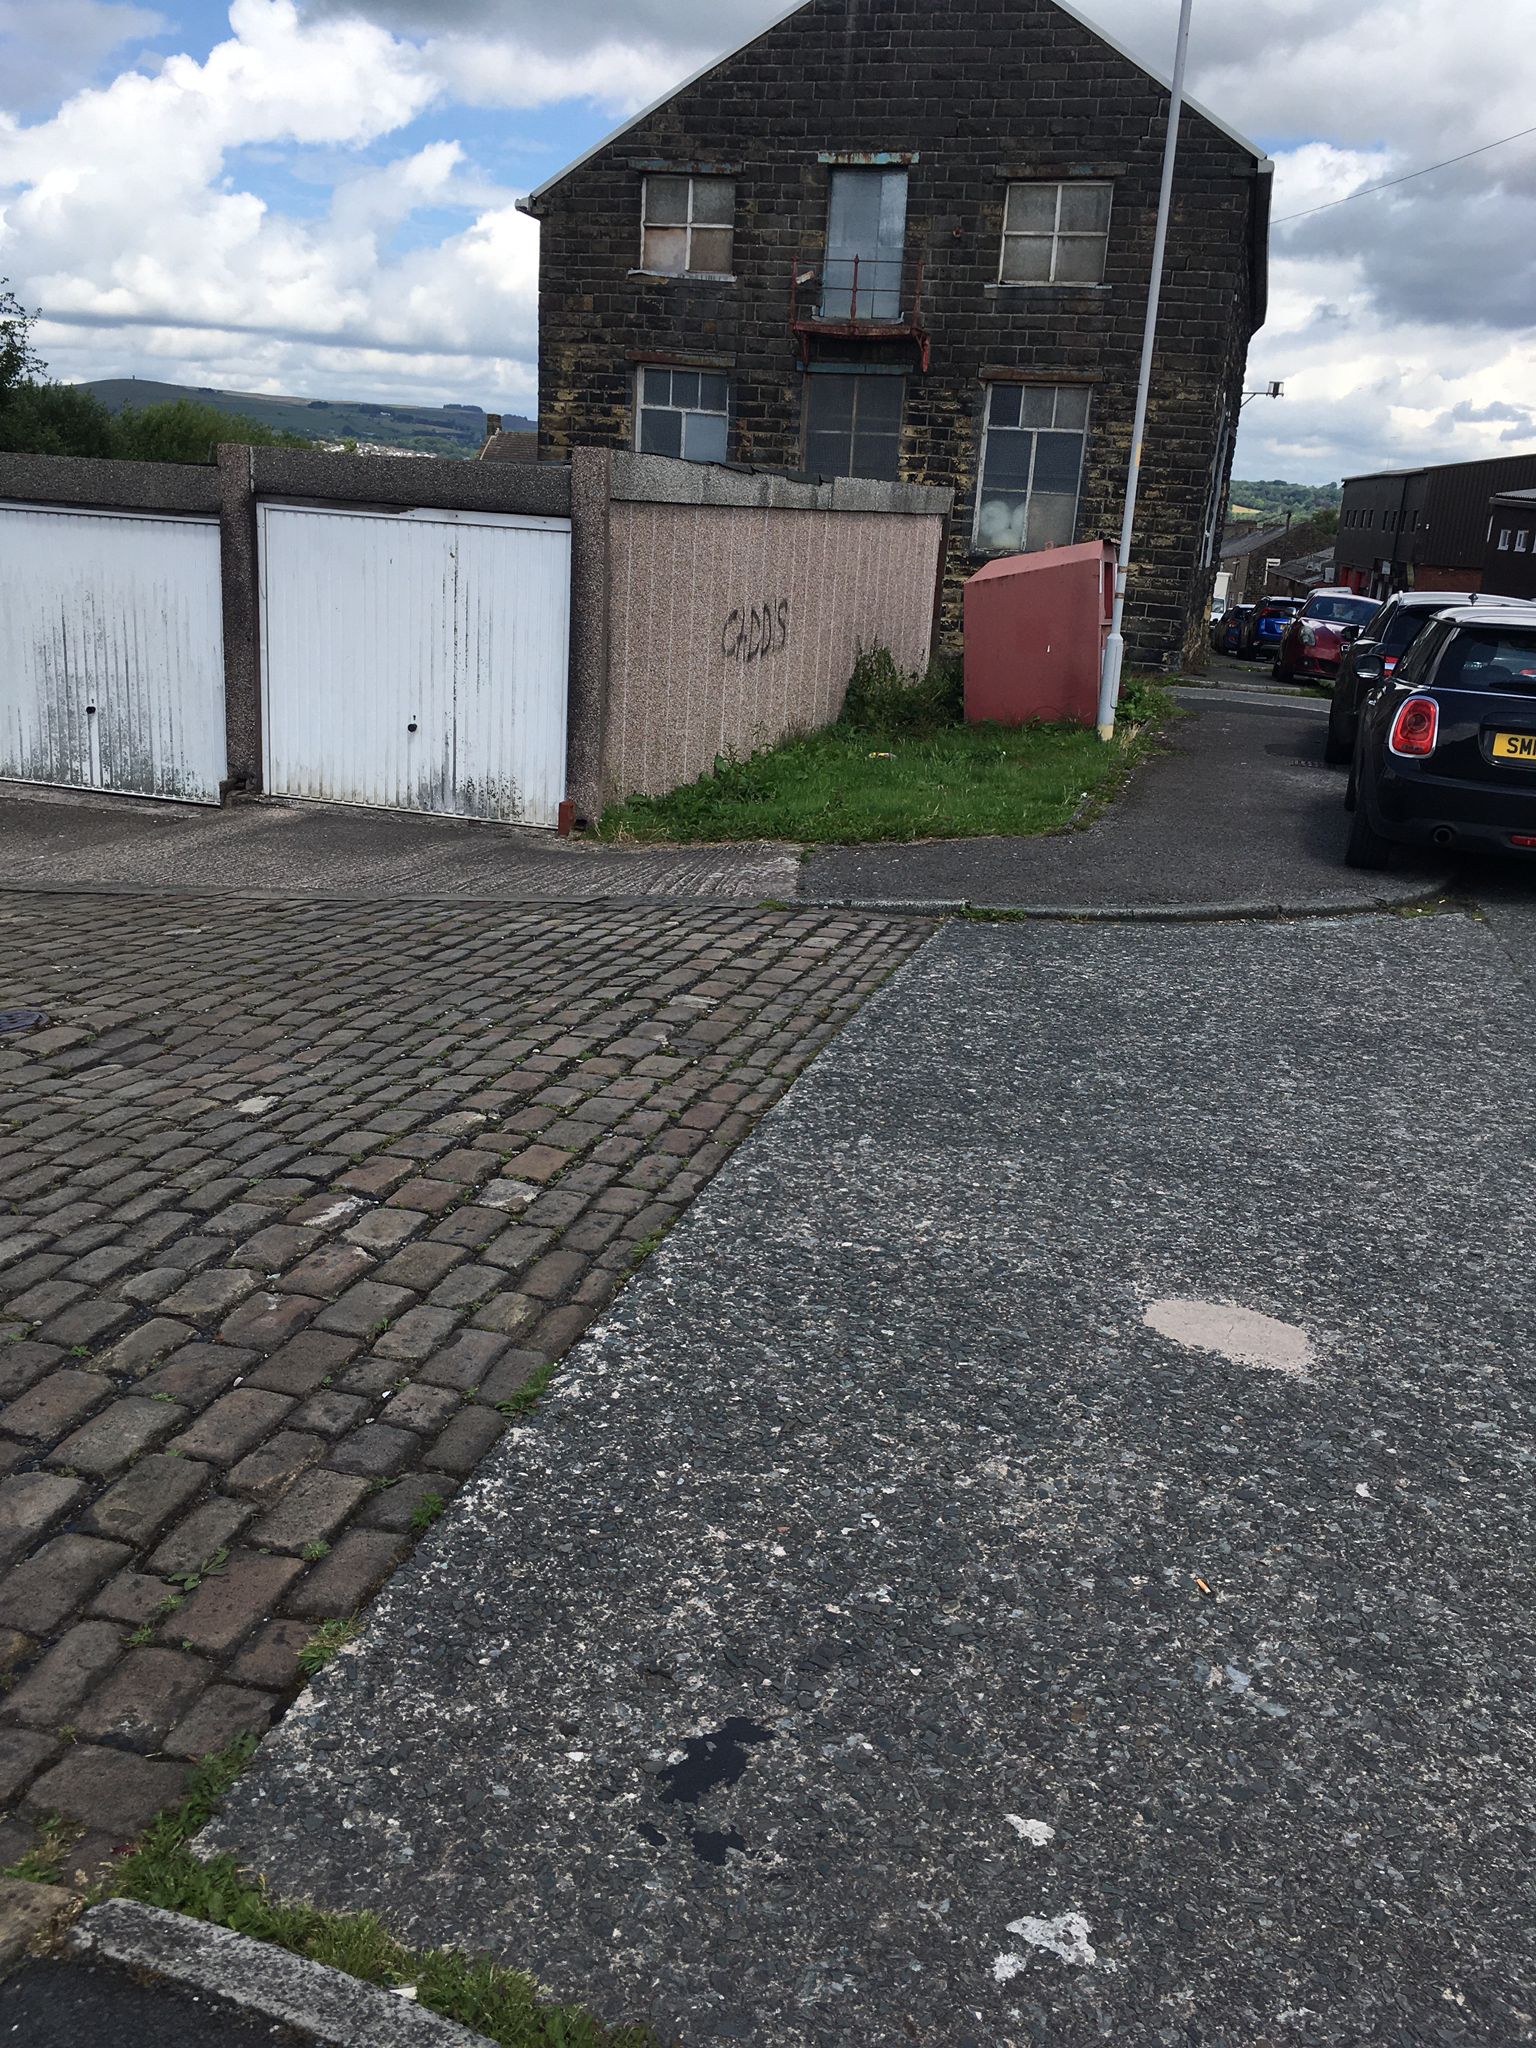 Burnley man fined for fly-tipping in Pendle